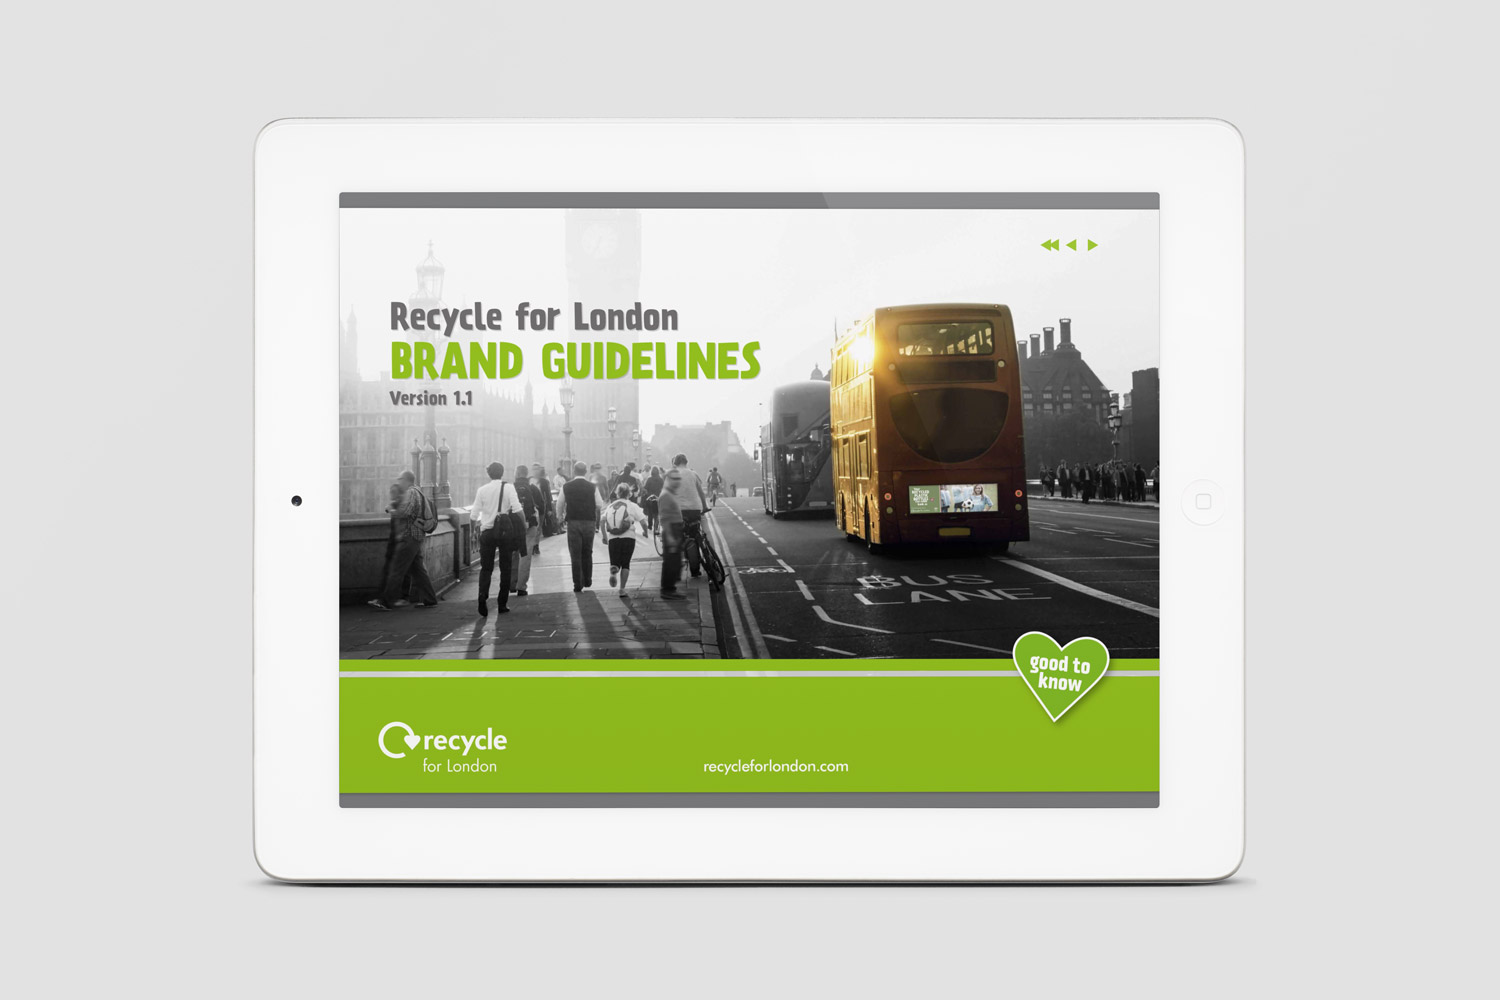 Recycle-for-London-Brand-Guidelines-Cover-iPad-leaflet-by-Get-it-Sorted.jpg